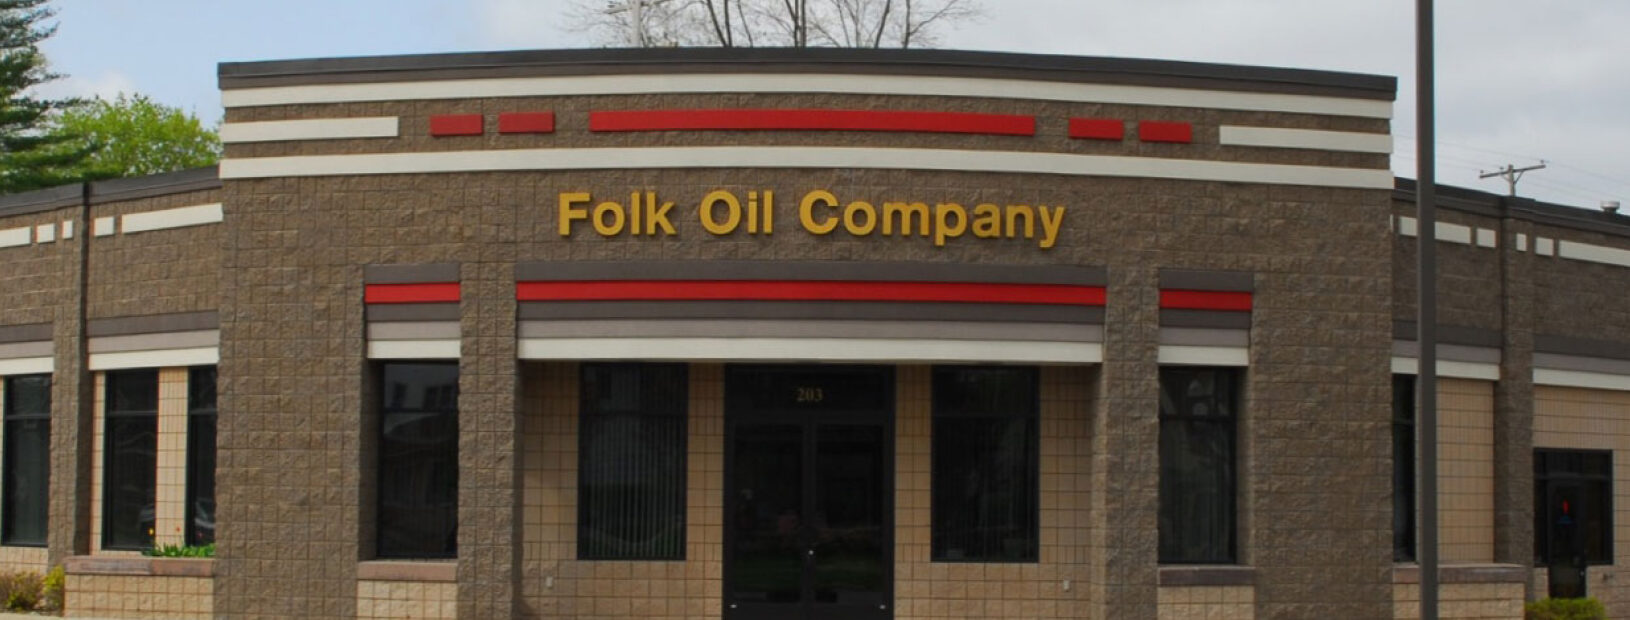 Fork Oil Company headquarters building